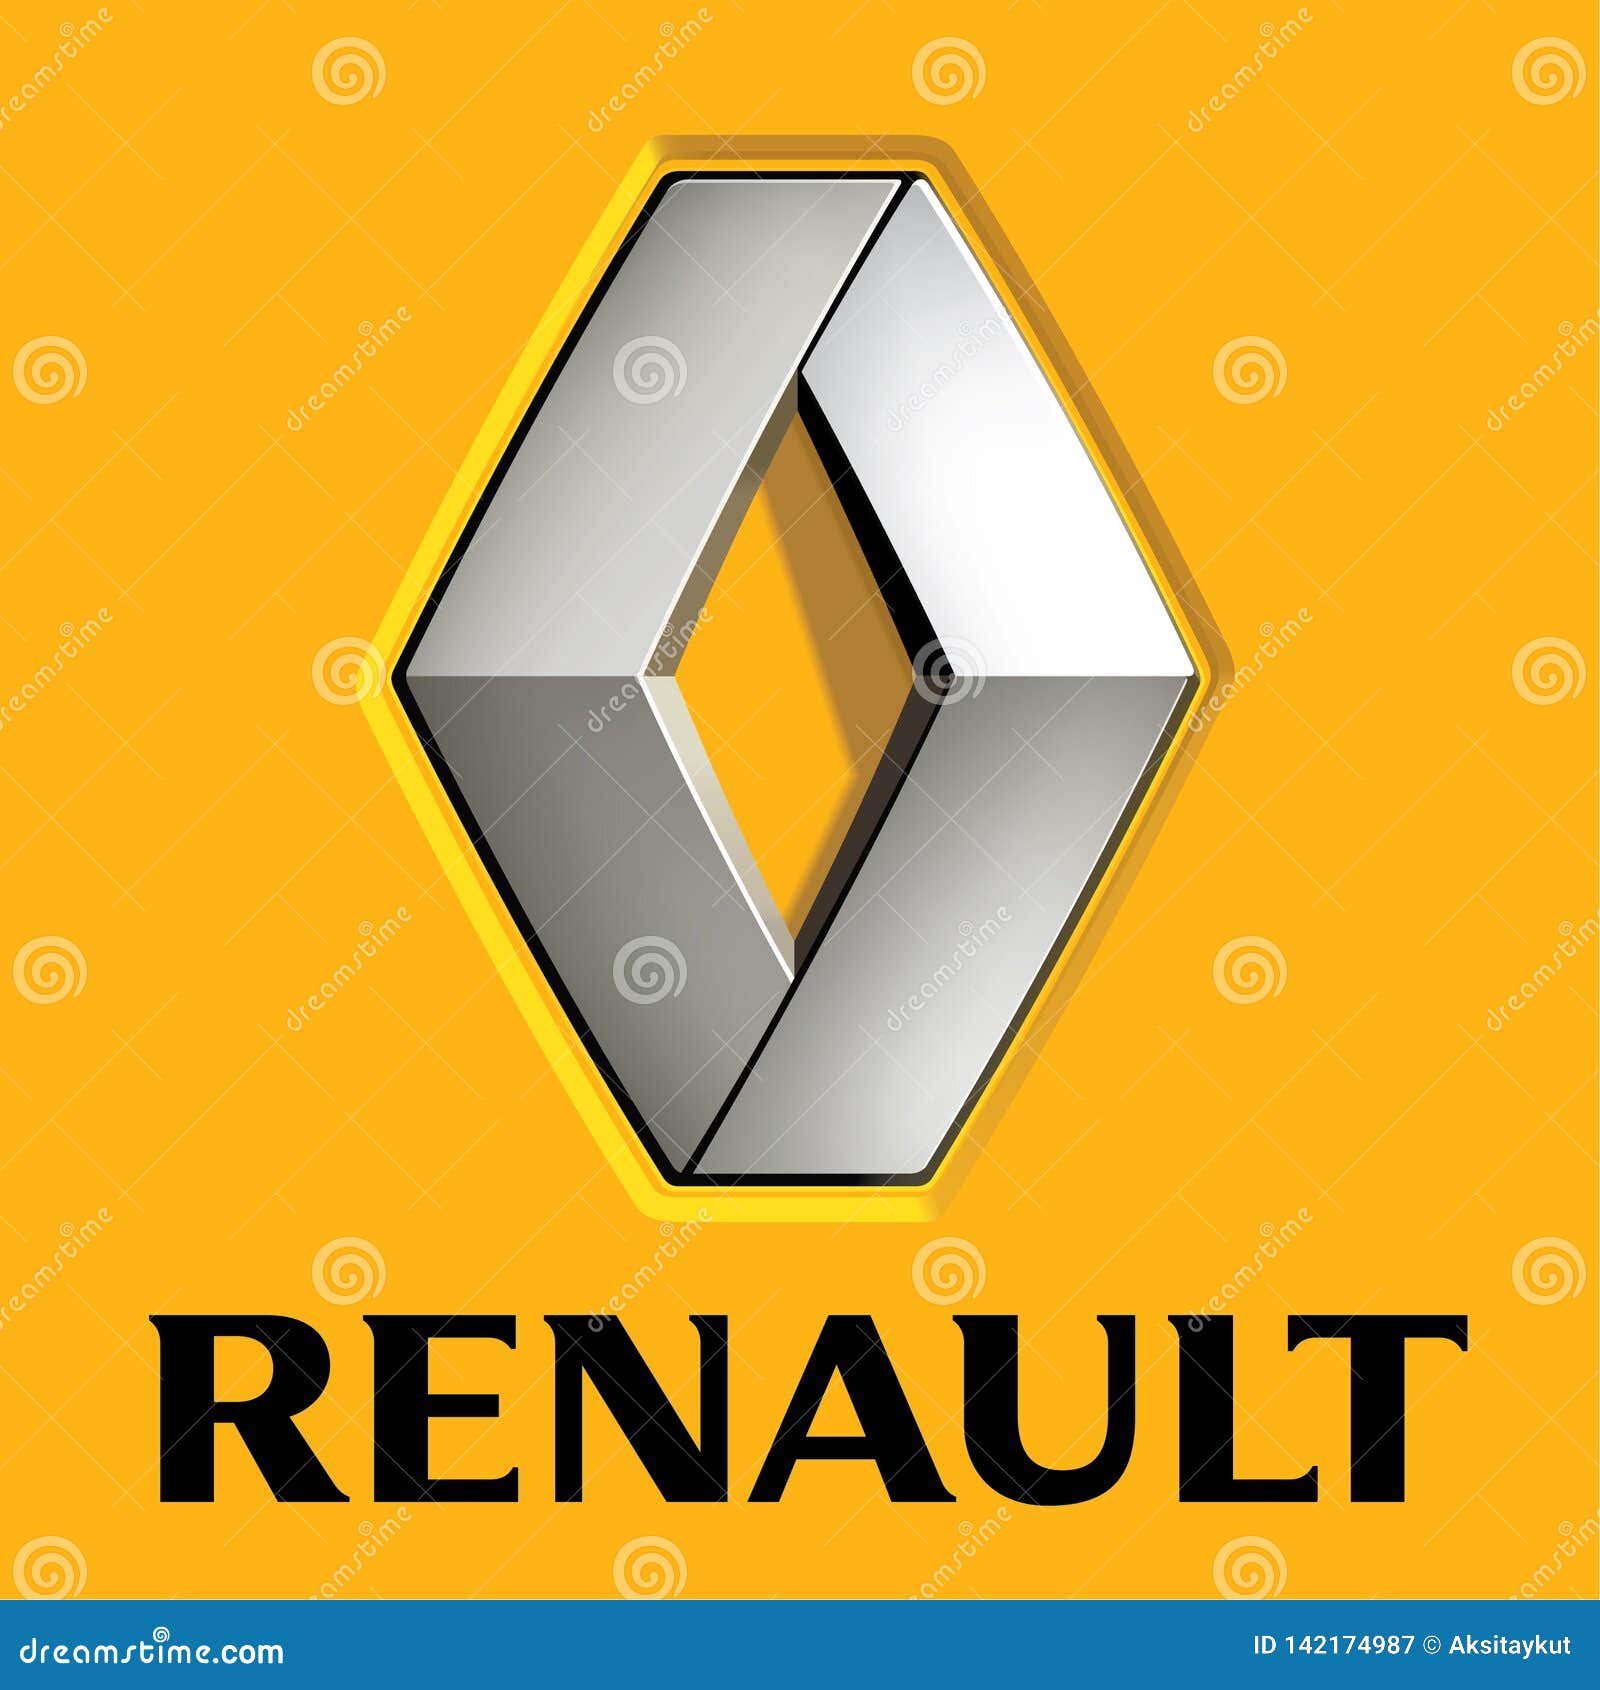 About our Group - Renault Group